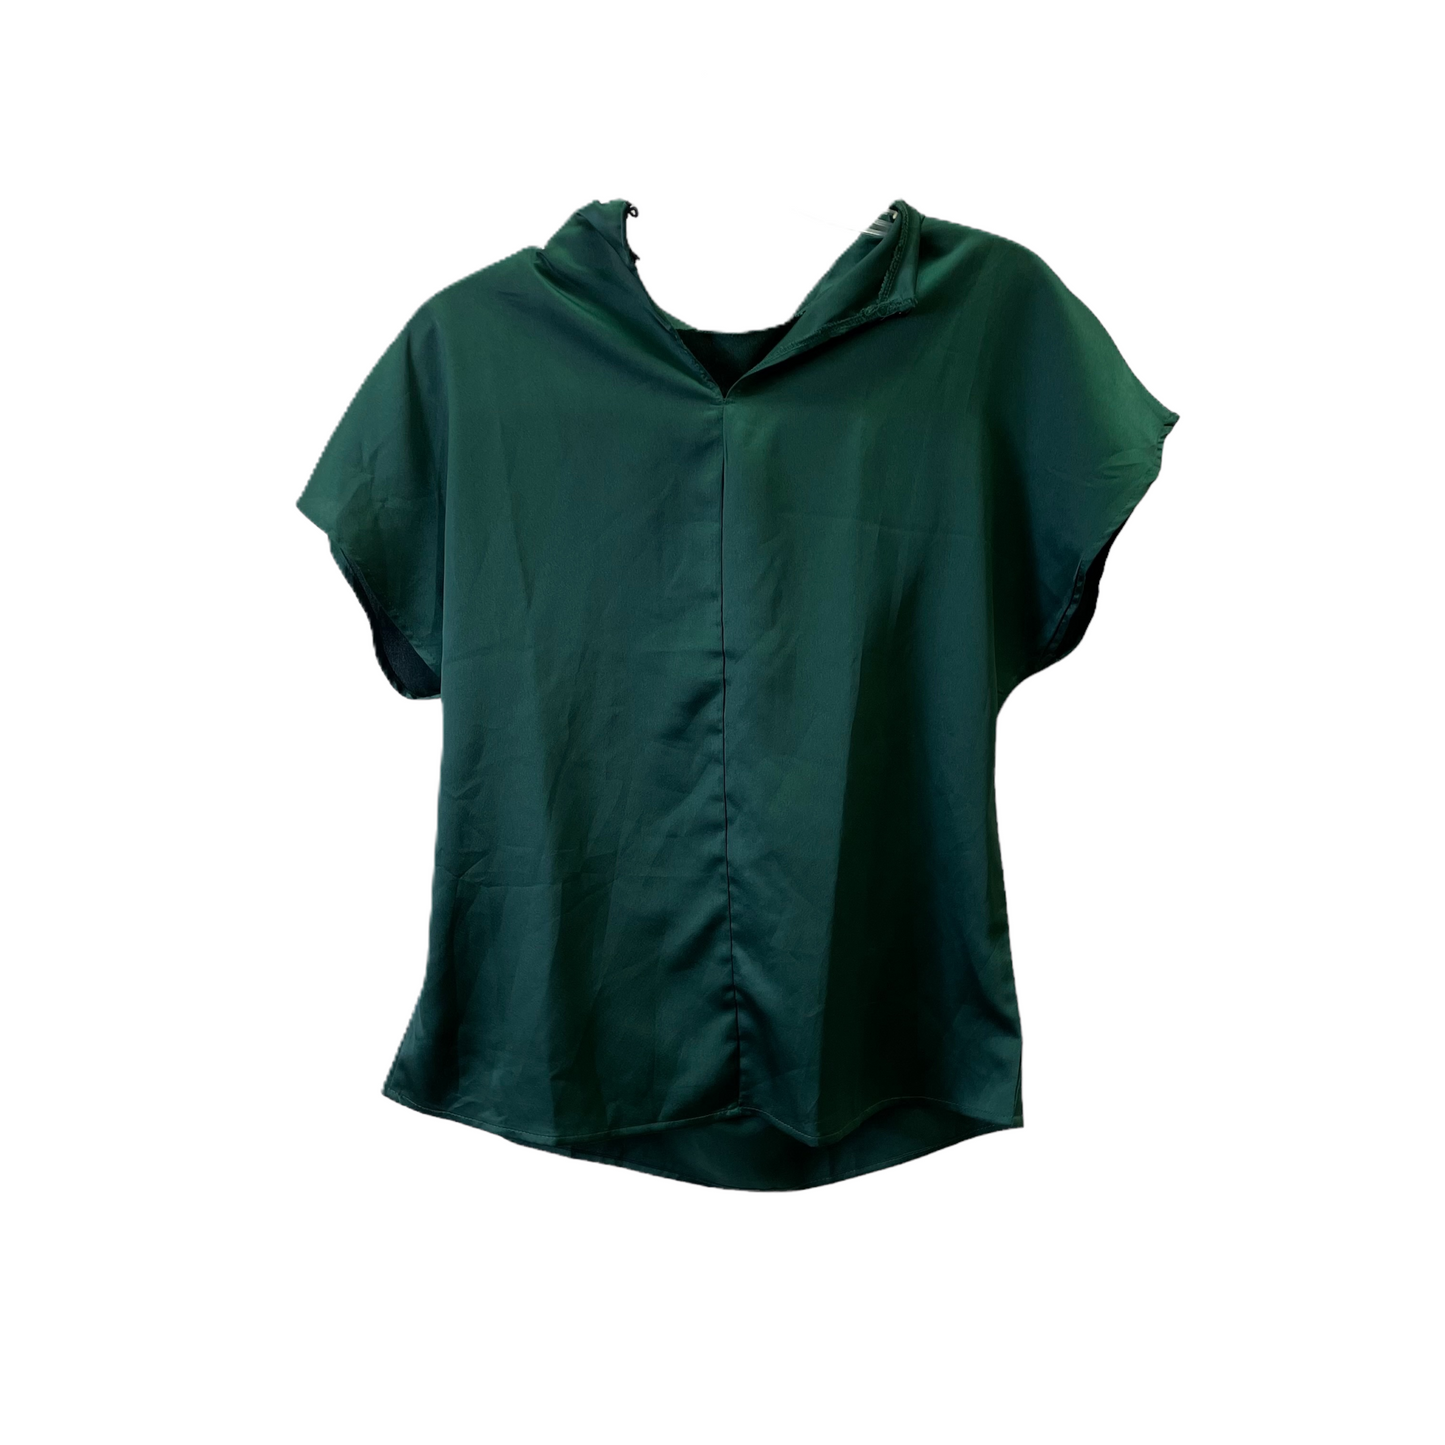 Green Top Sleeveless By Shein, Size: S